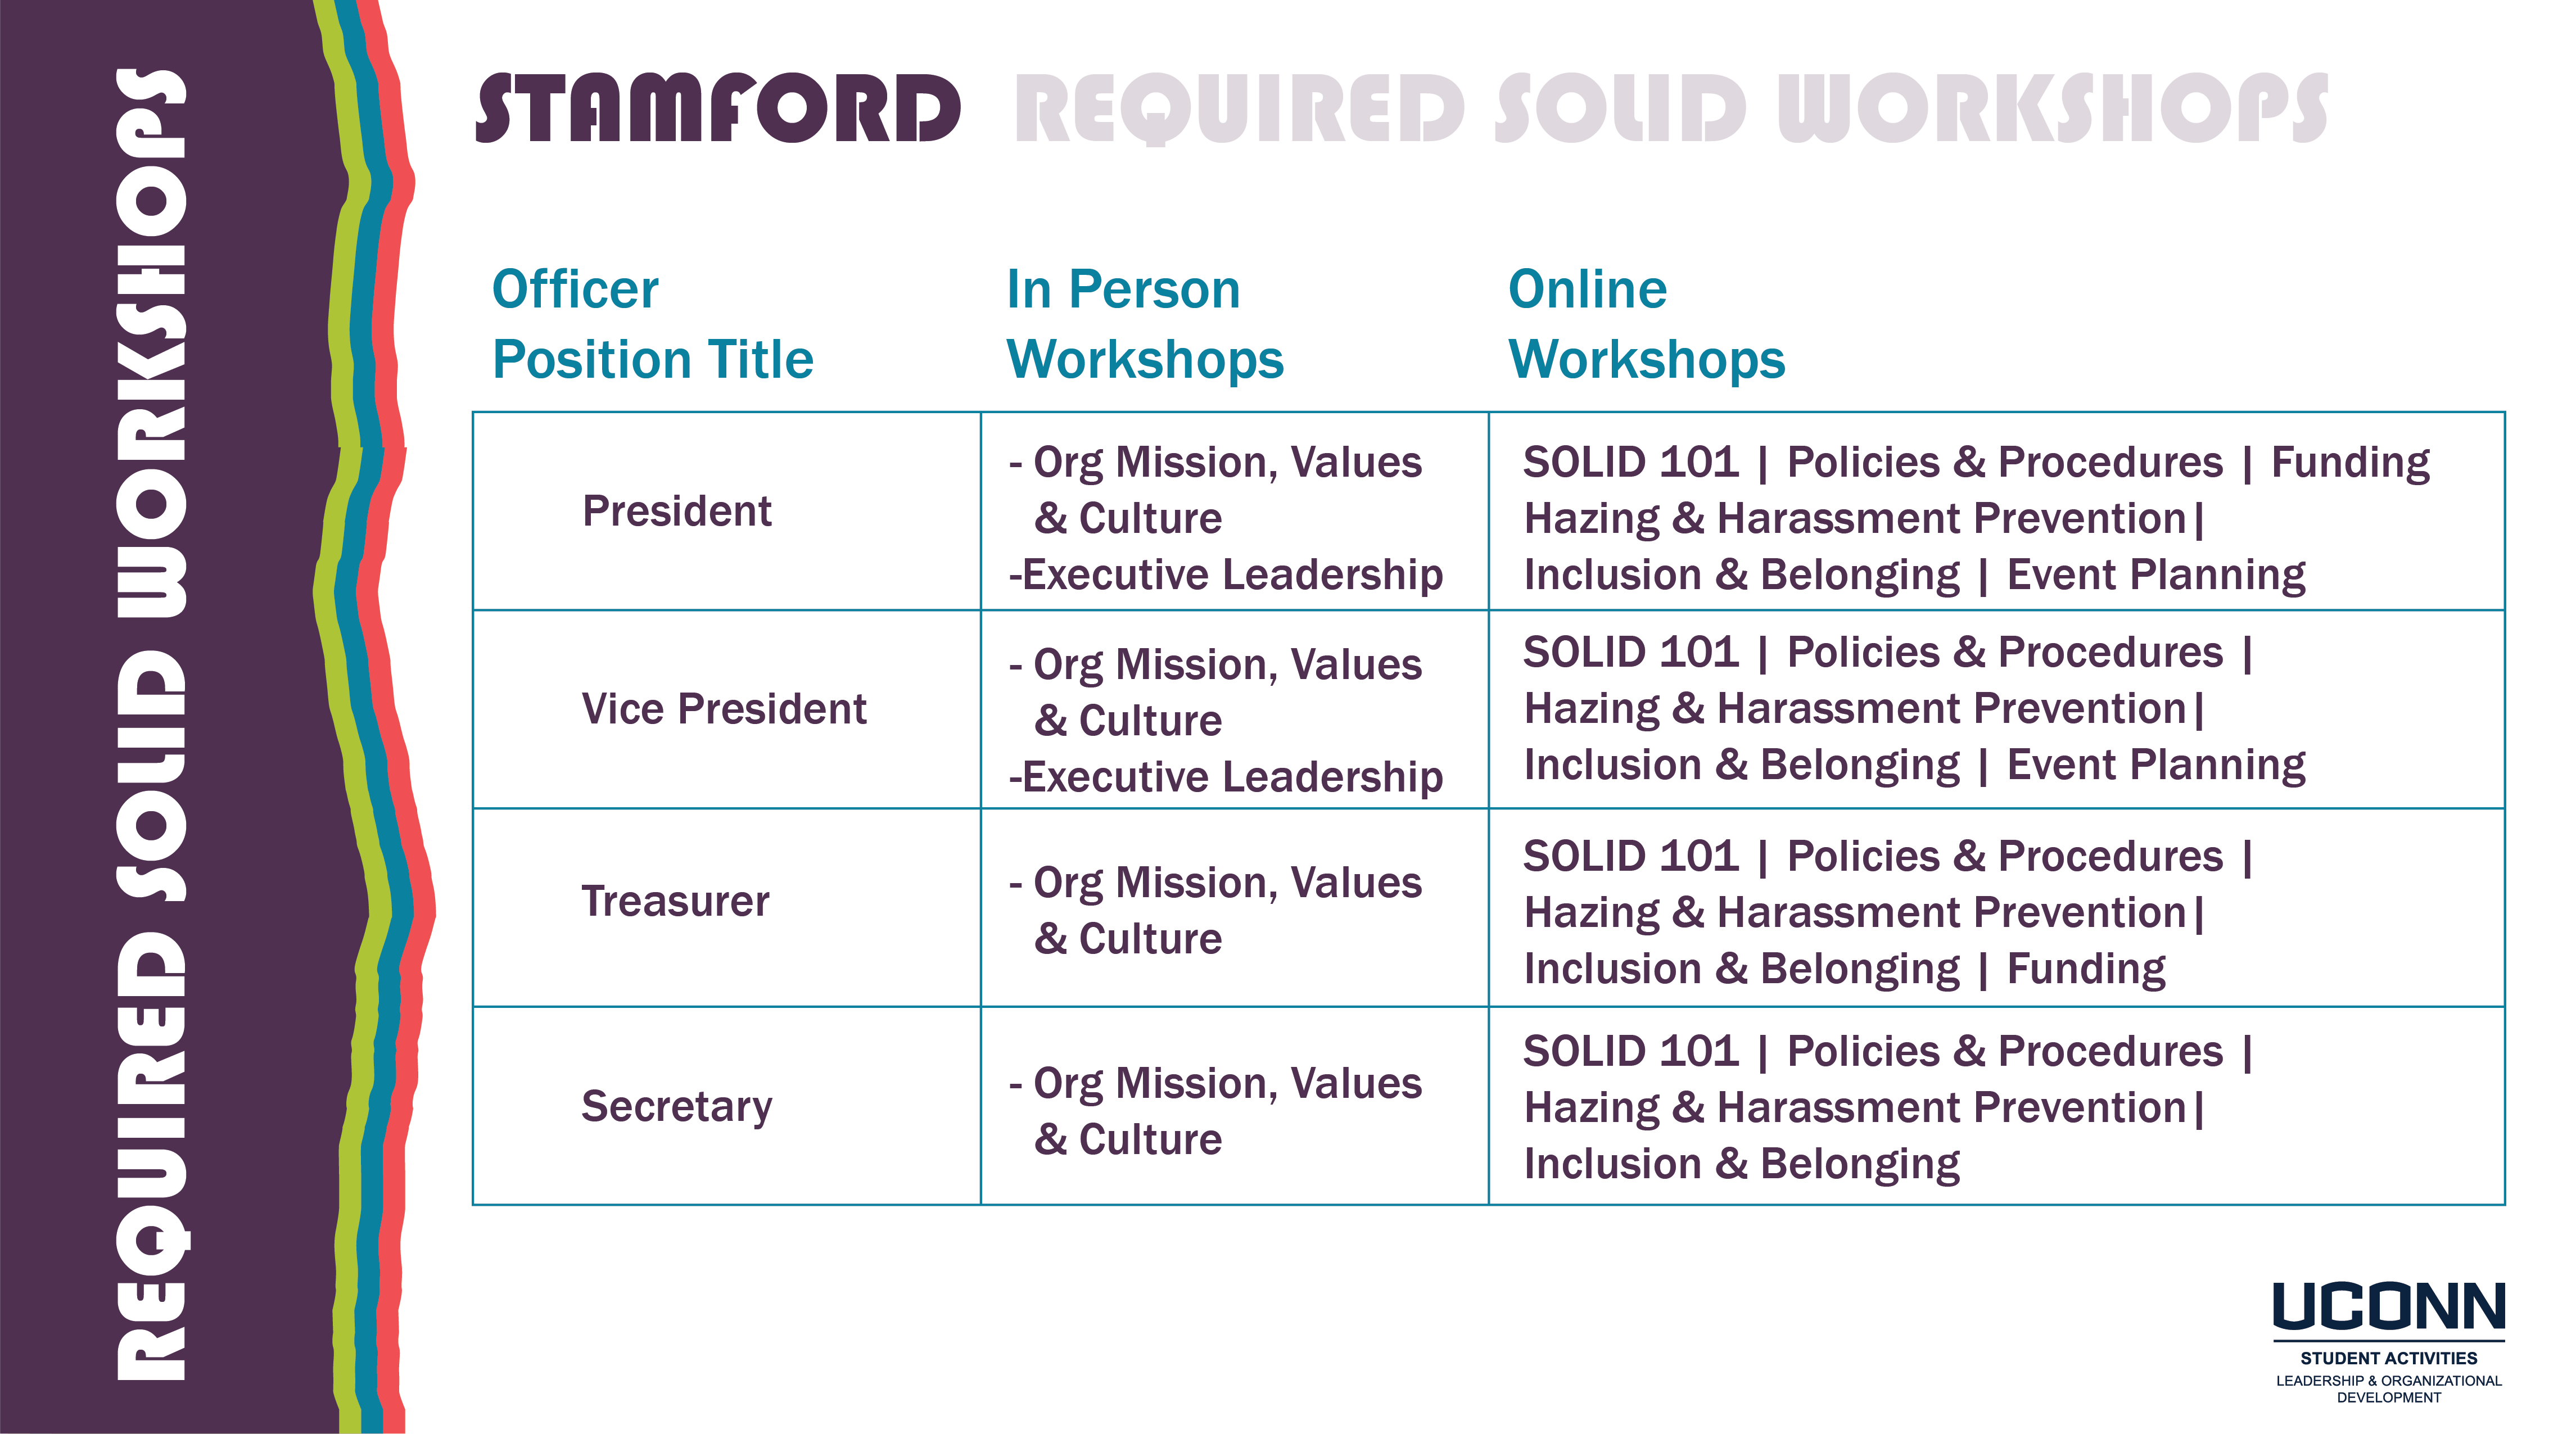 Stamford SOLID Workshop Requirements Chart 2022